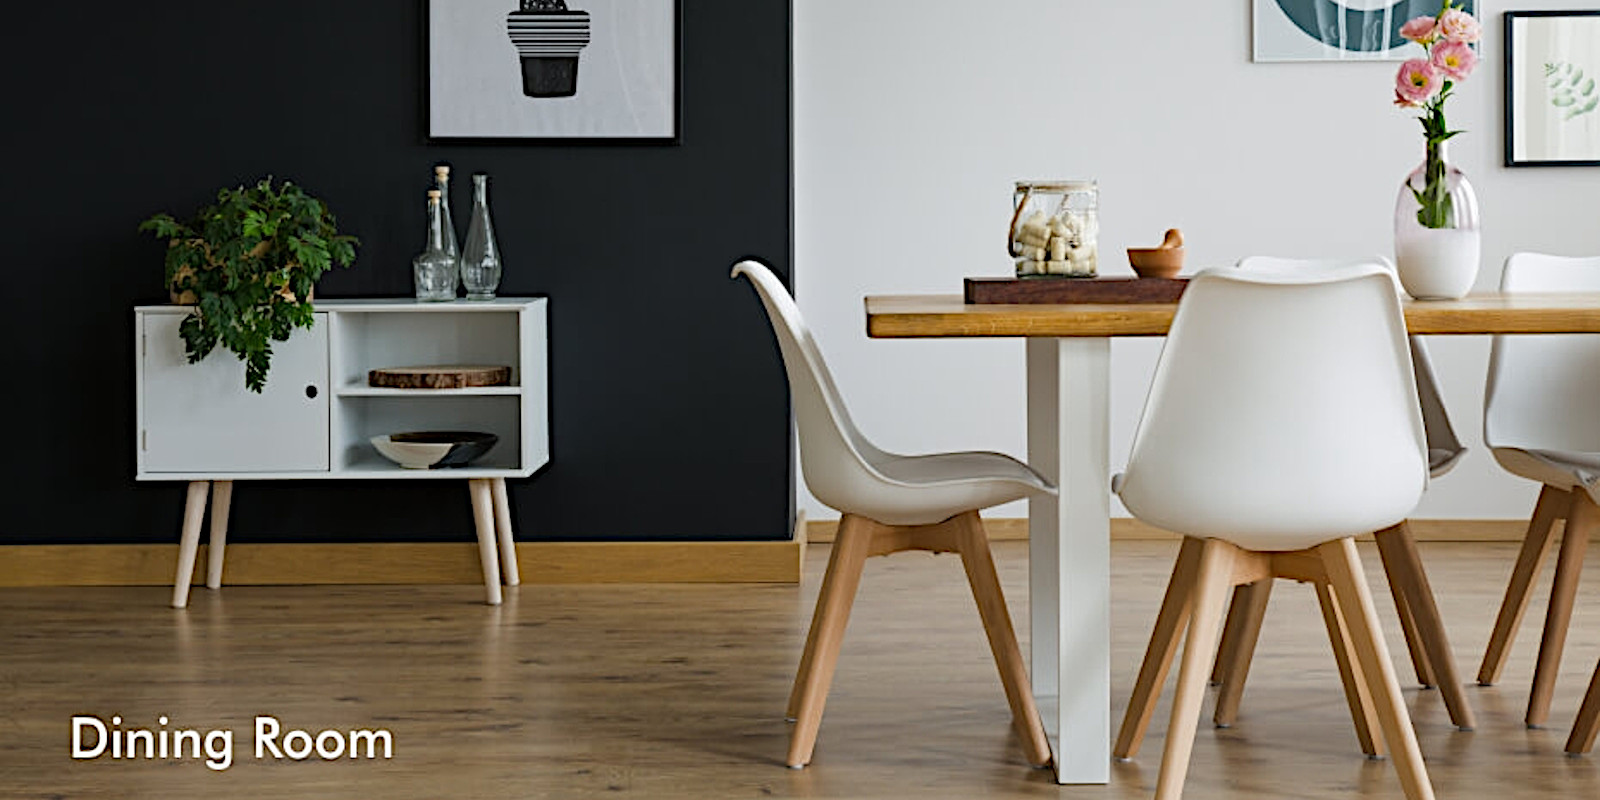 Dining room furniture at a discount